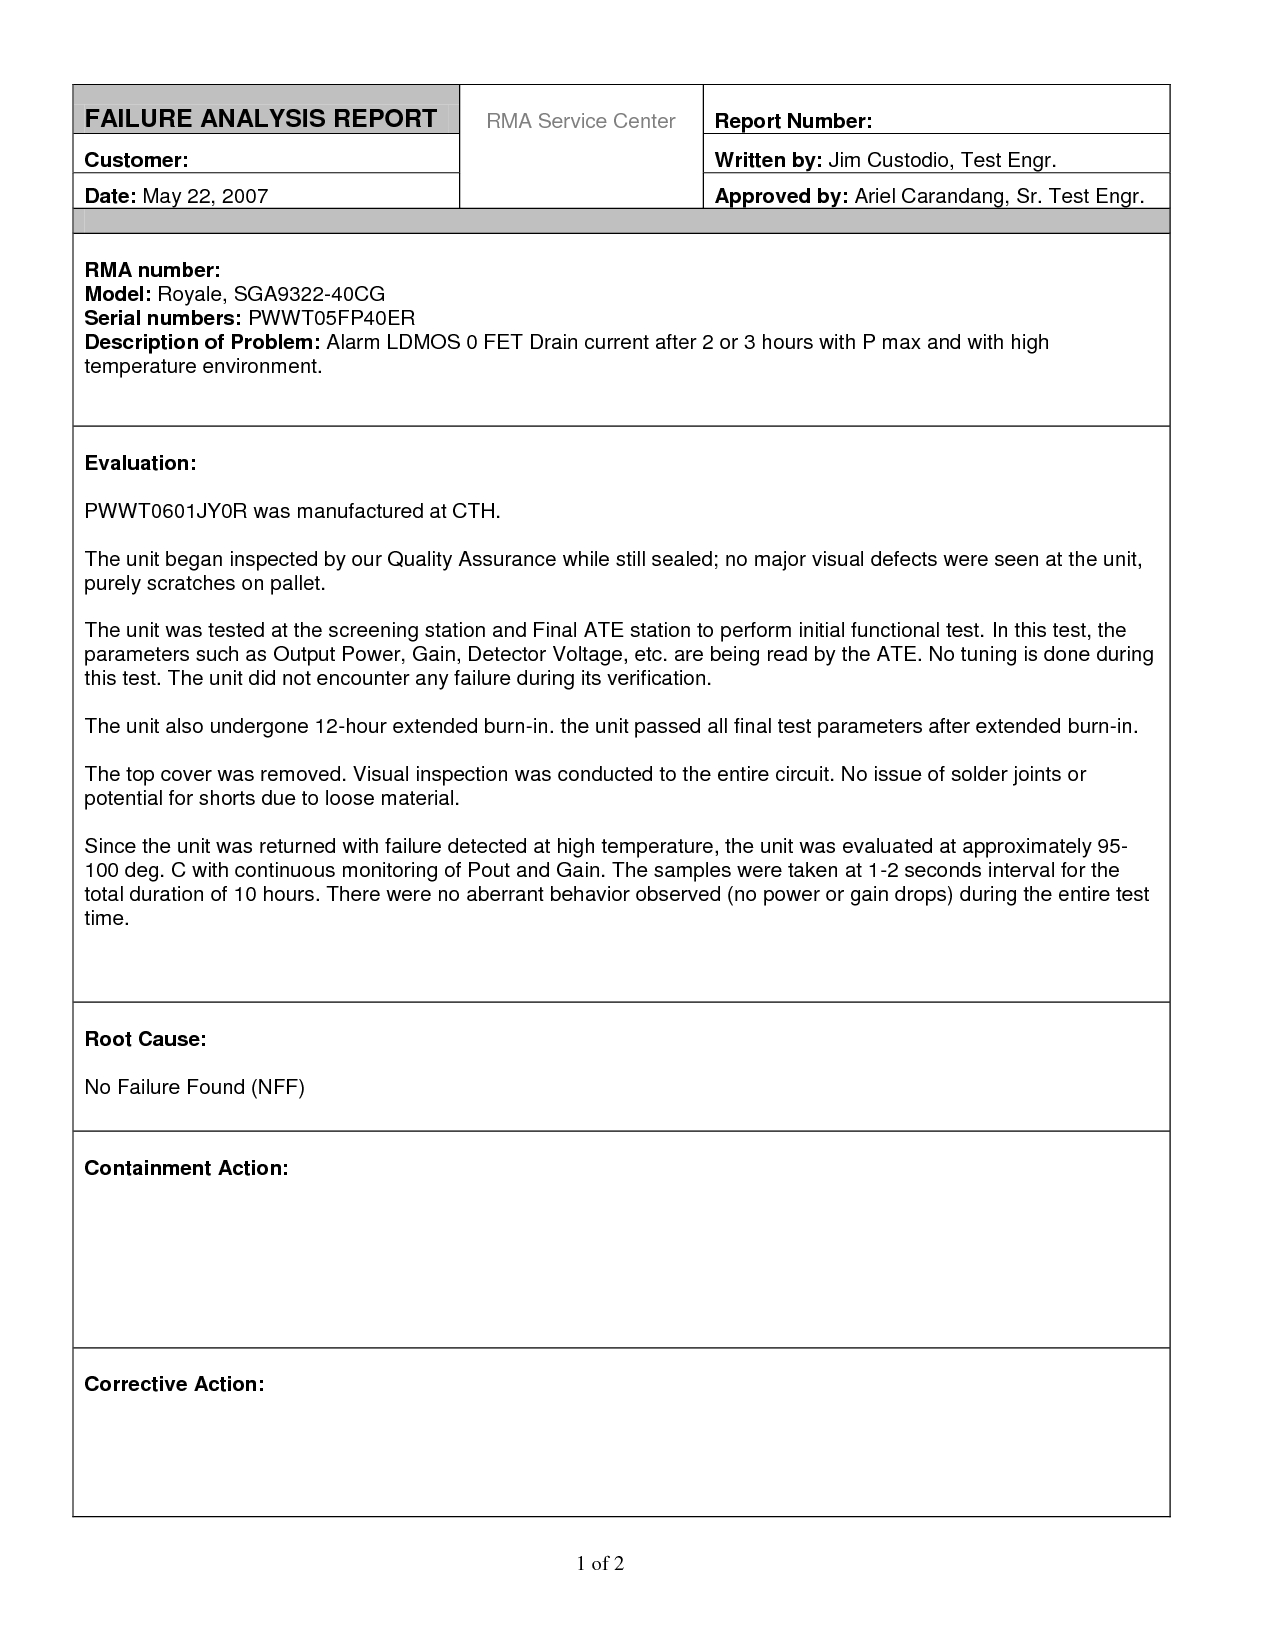 Excellent Failure Analysis Report Writtenjimcustodio34 Throughout Business Analyst Report Template